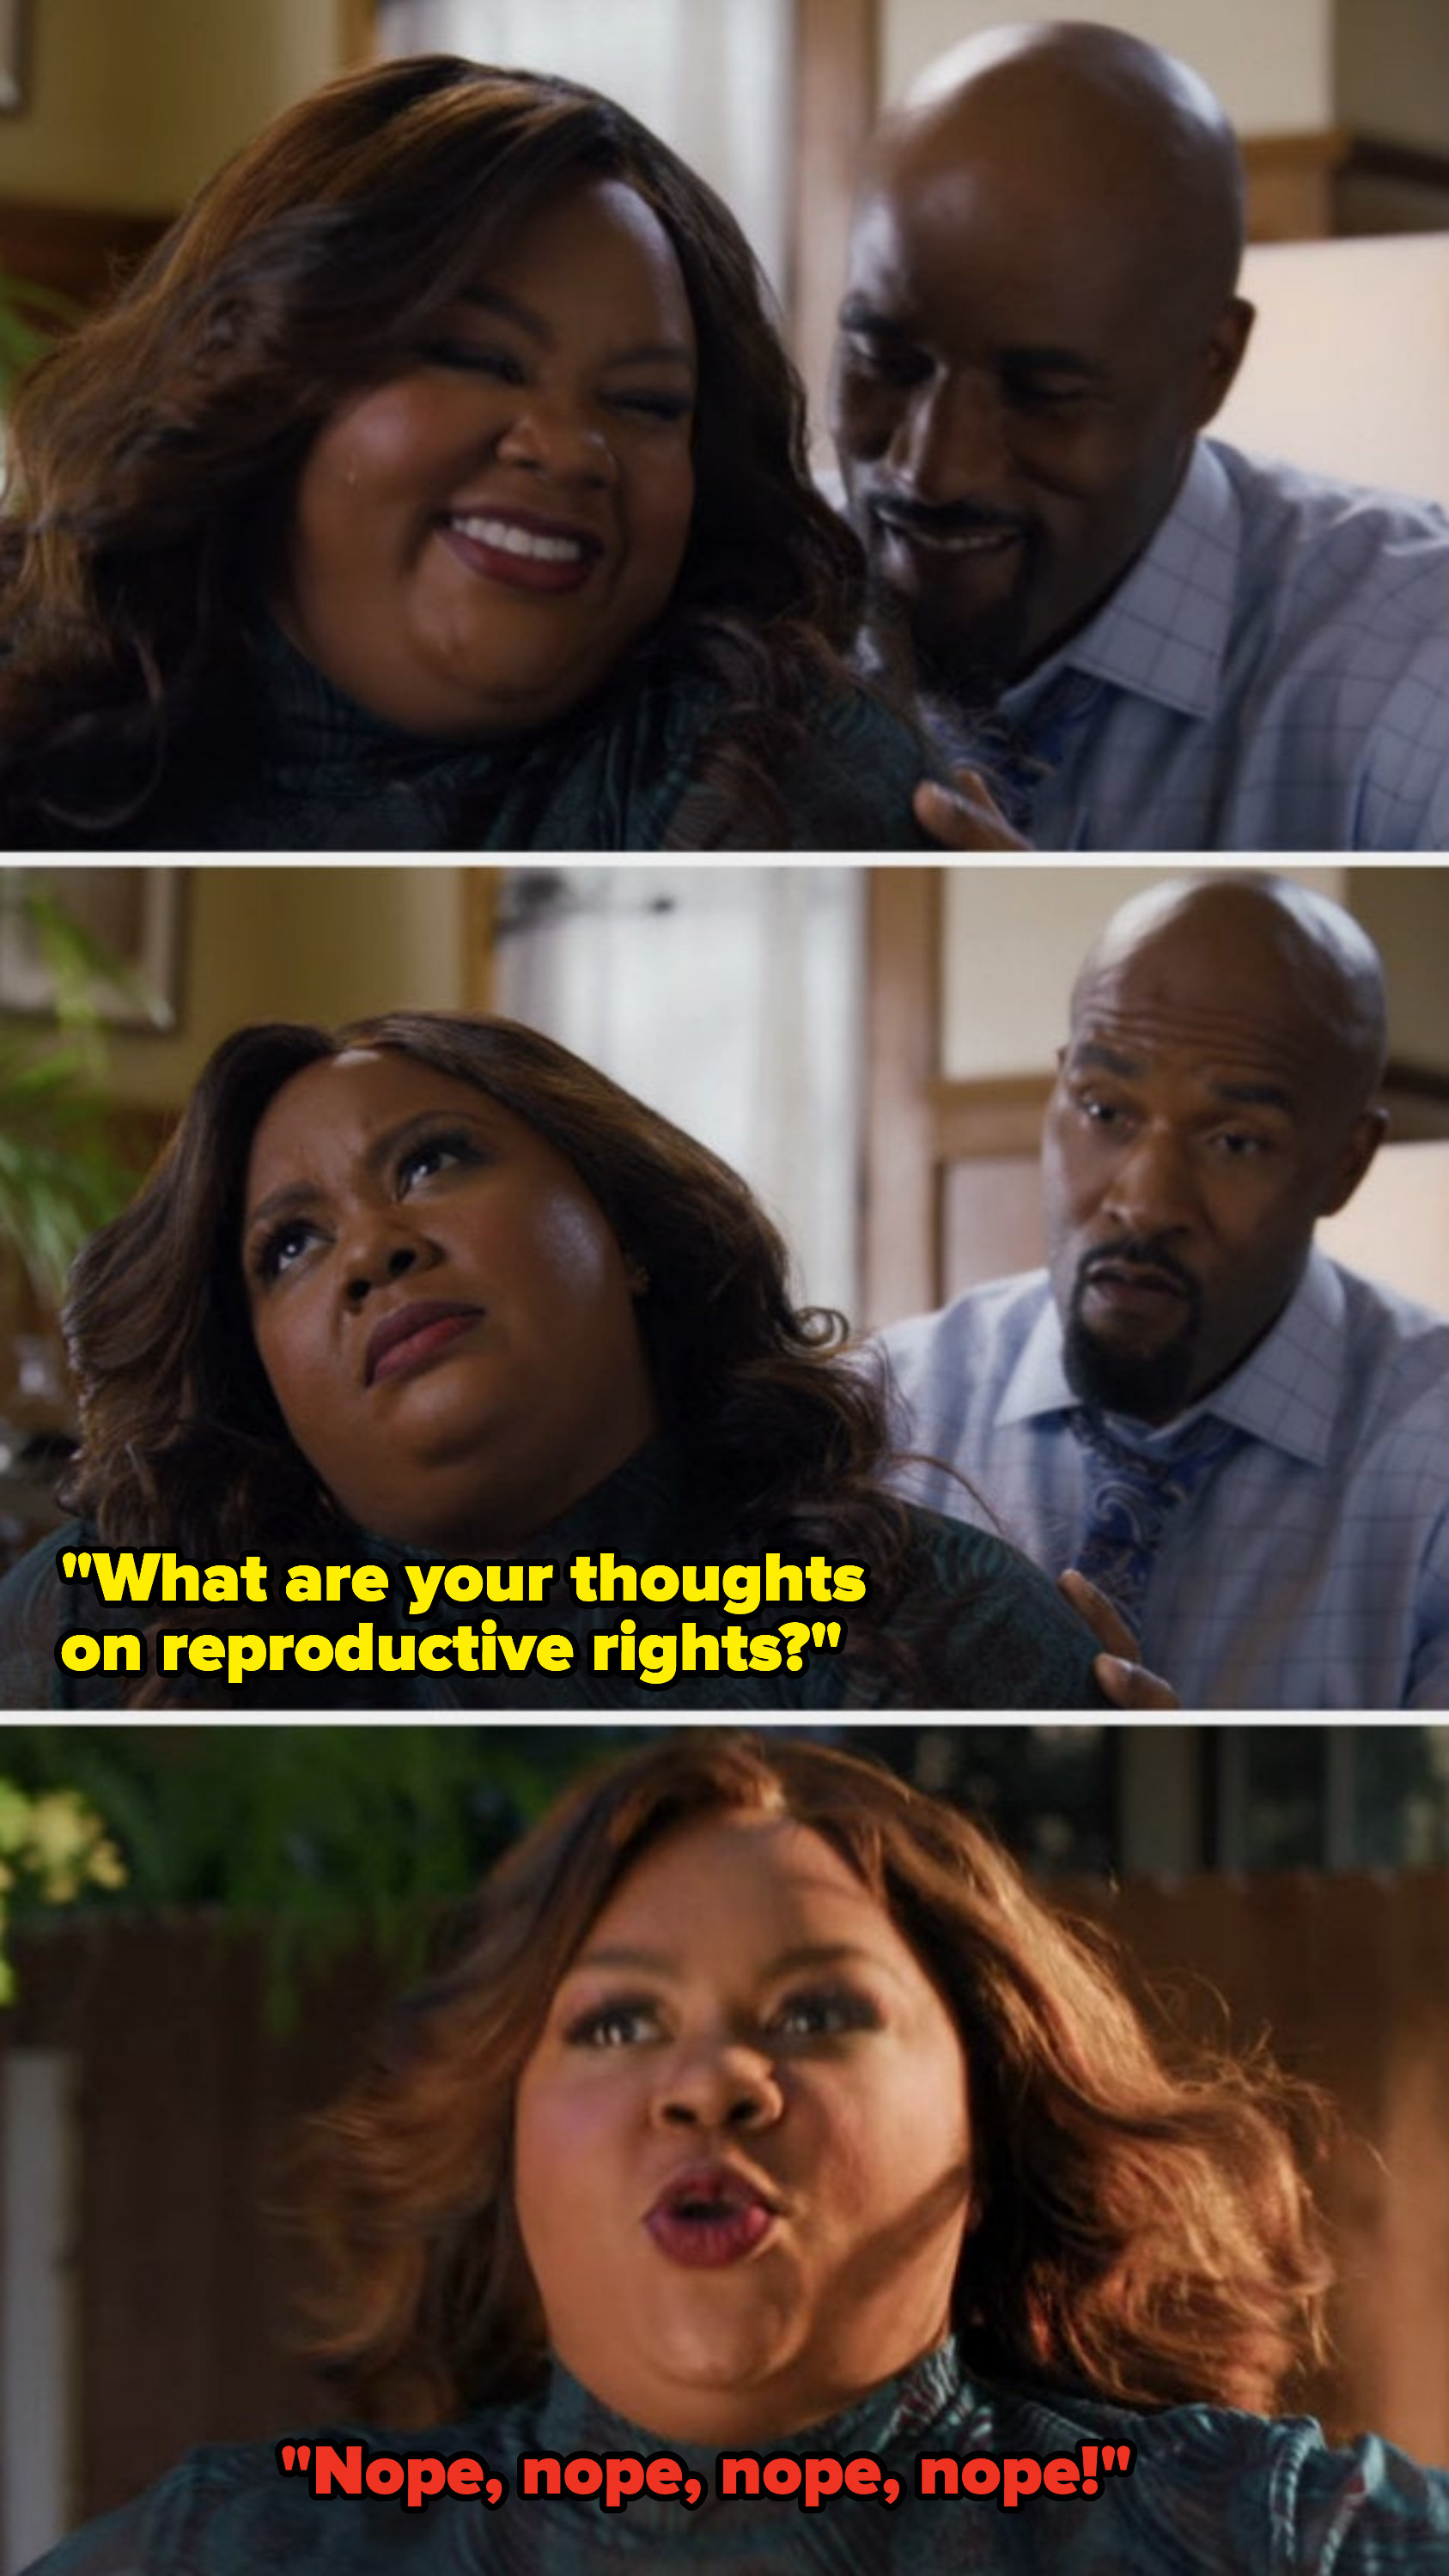 Nicky leaves her date&#x27;s place after learning more about his viewpoint on reproductive rights